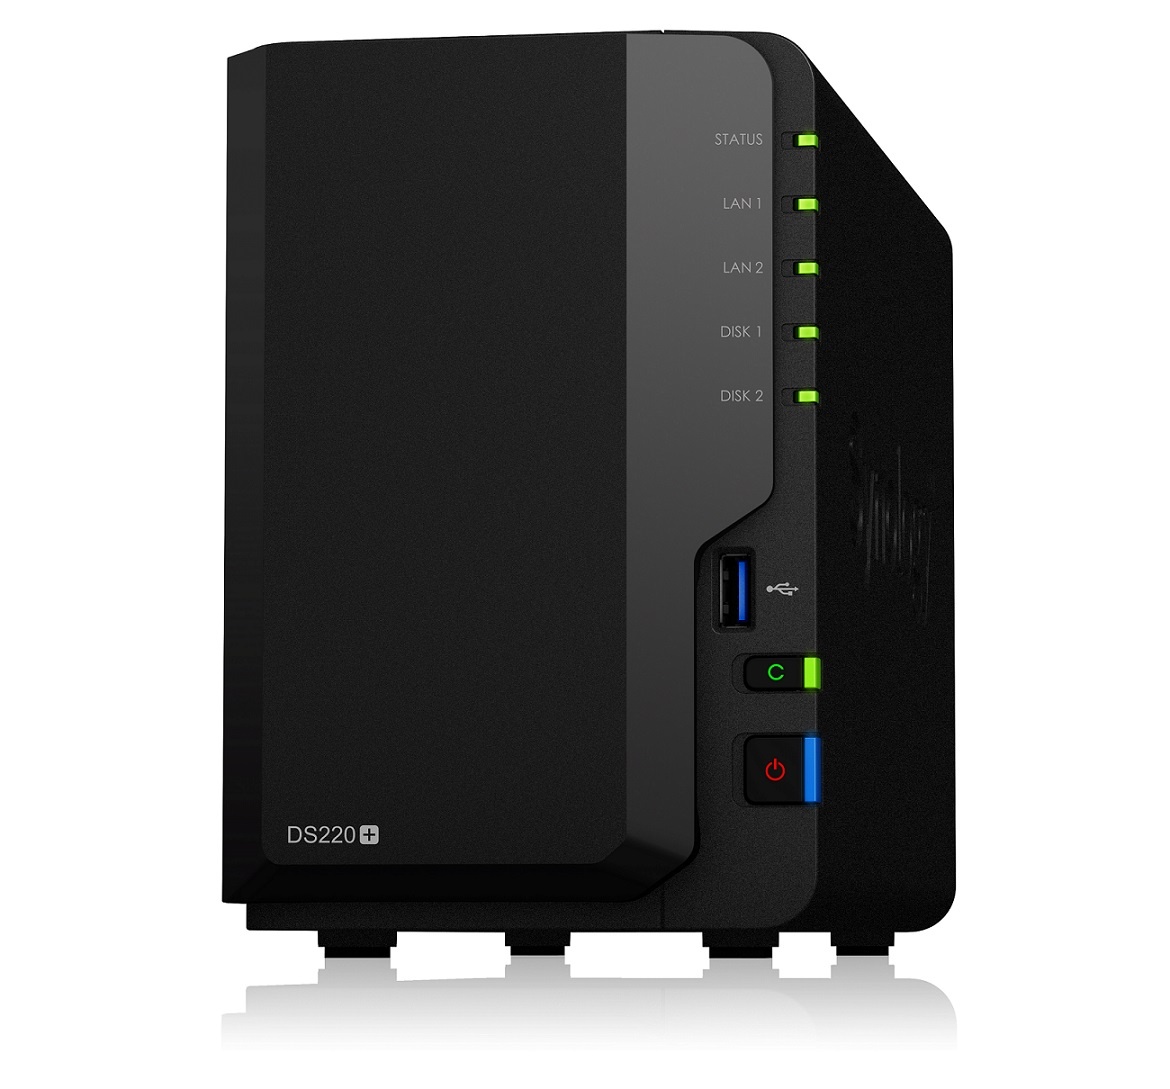 Synology DiskStation Manager Technology